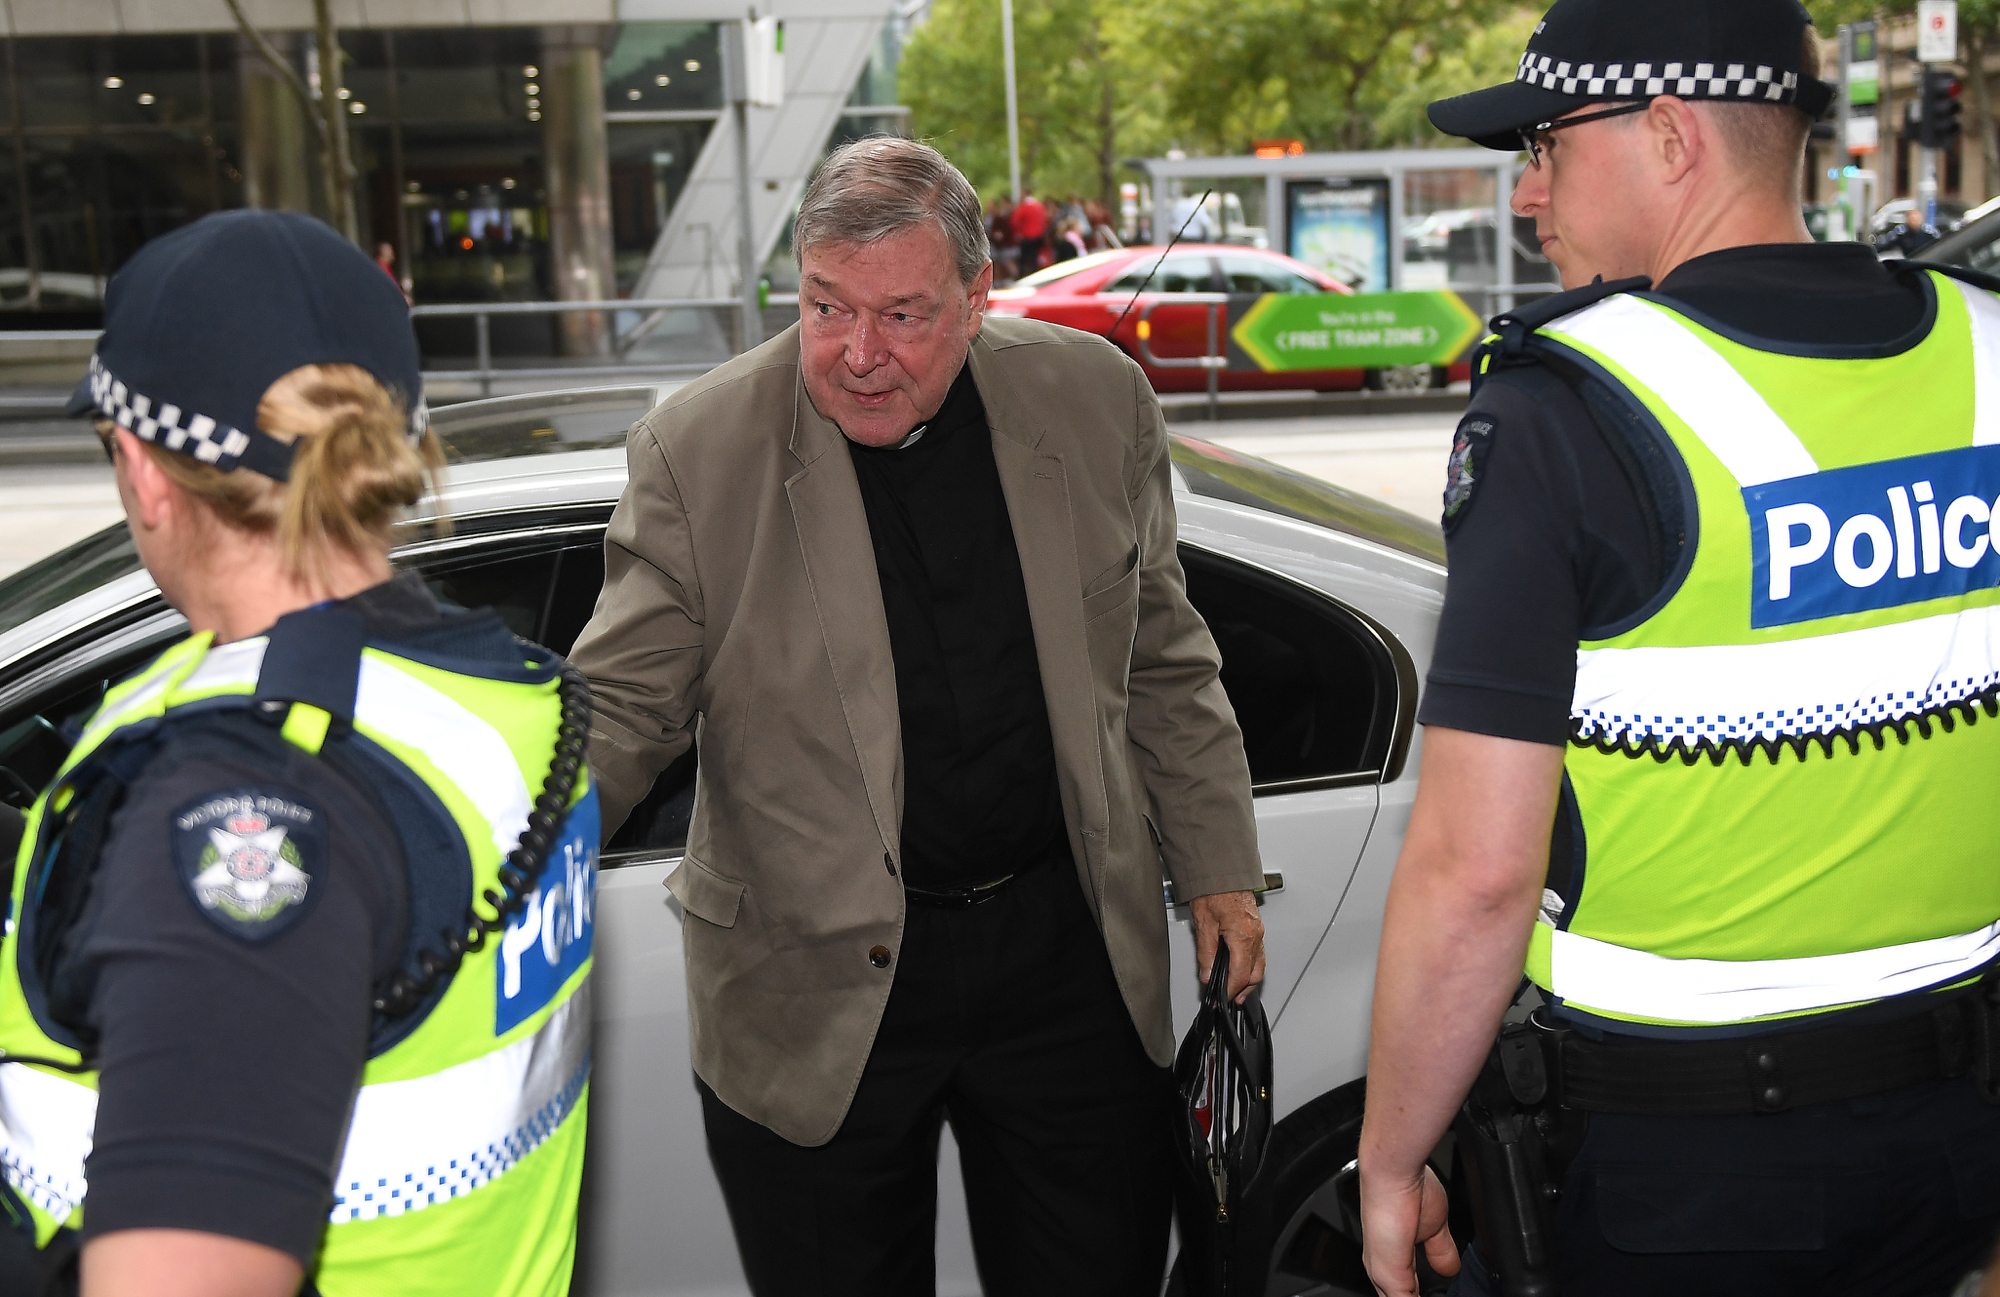 Witness accuses Cardinal Pell’s defence lawyer of insulting him